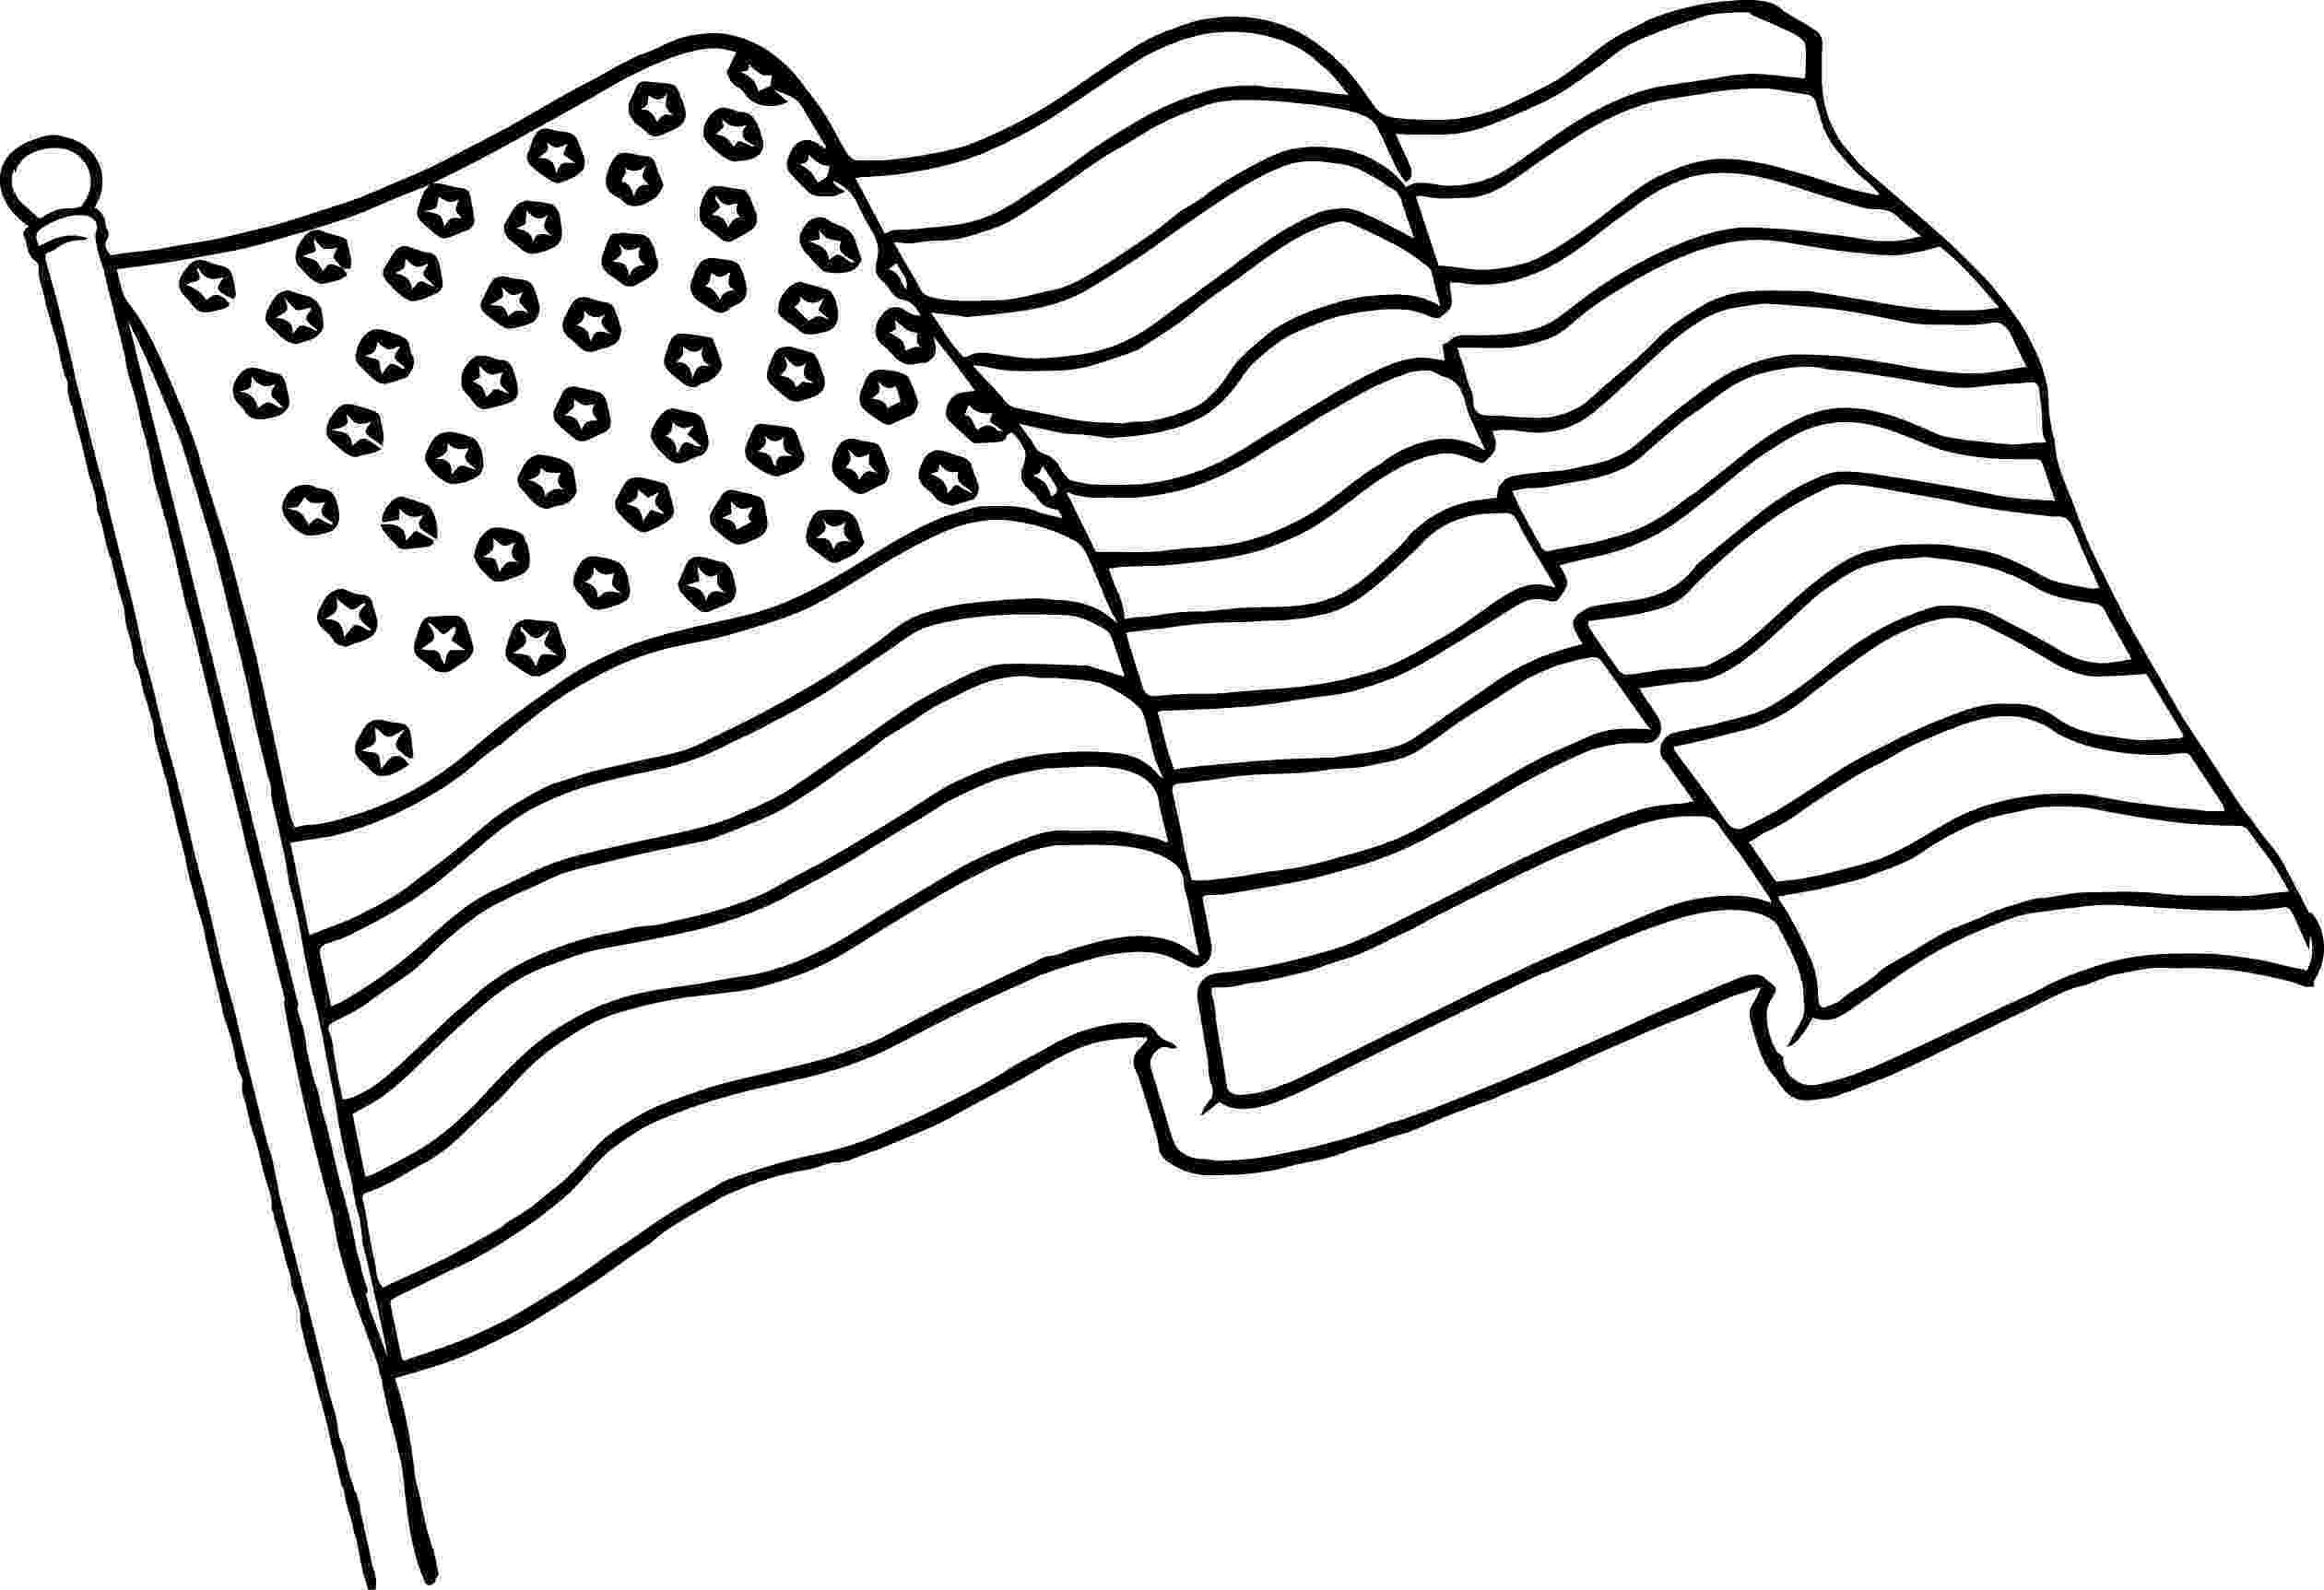 colouring flag world flags coloring sheets 8 flag colouring 